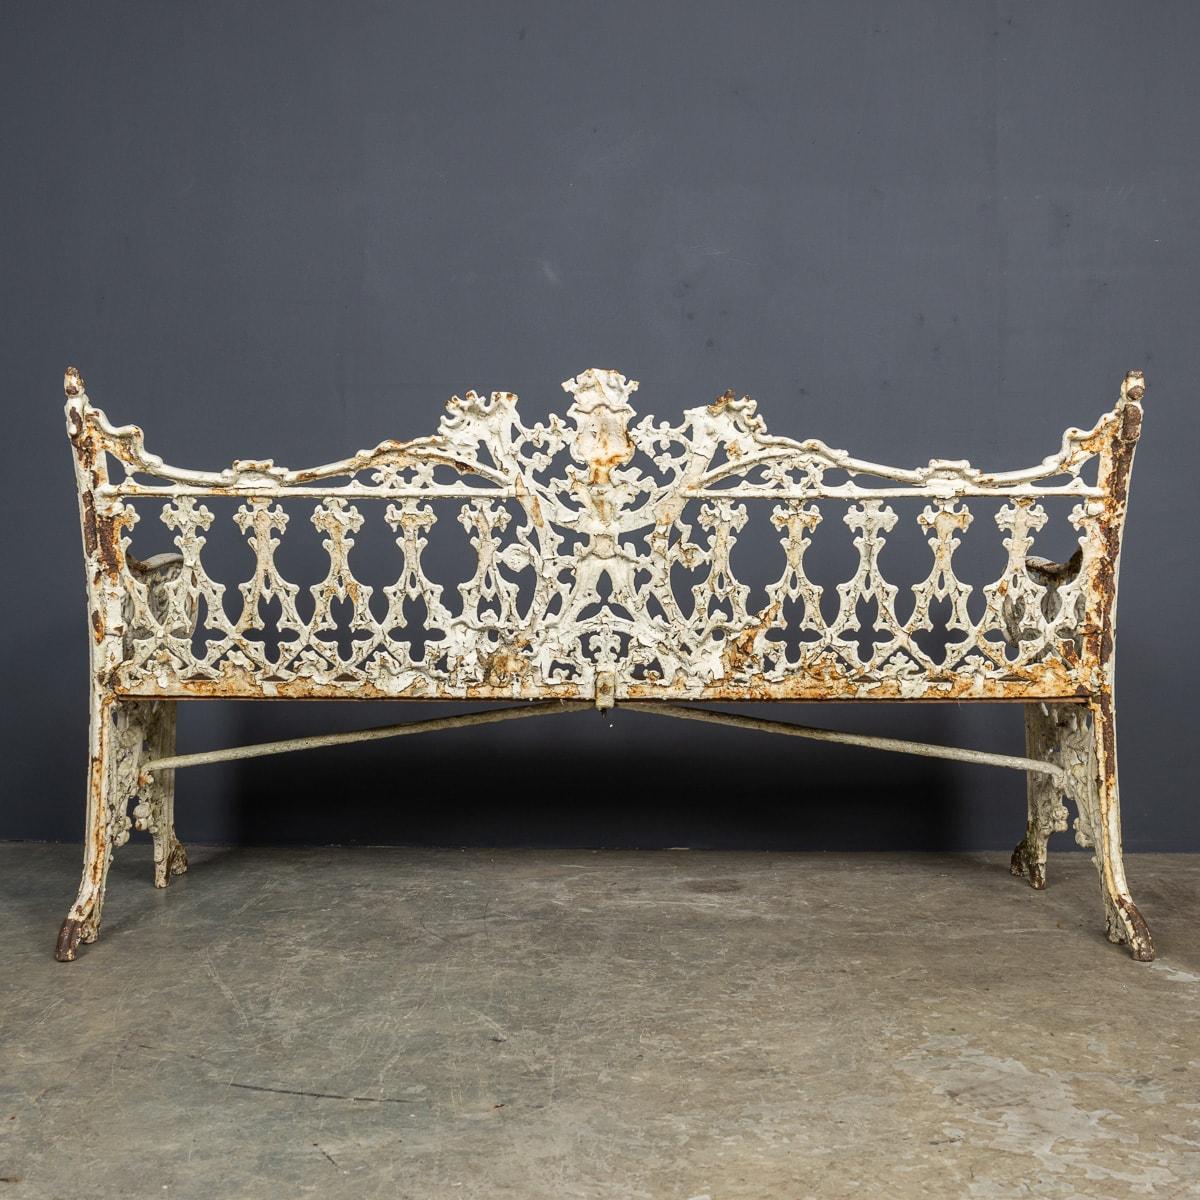 Late 19th Century Antique 19th Century Victorian Cast Iron & Wood Garden Bench c.1890 For Sale